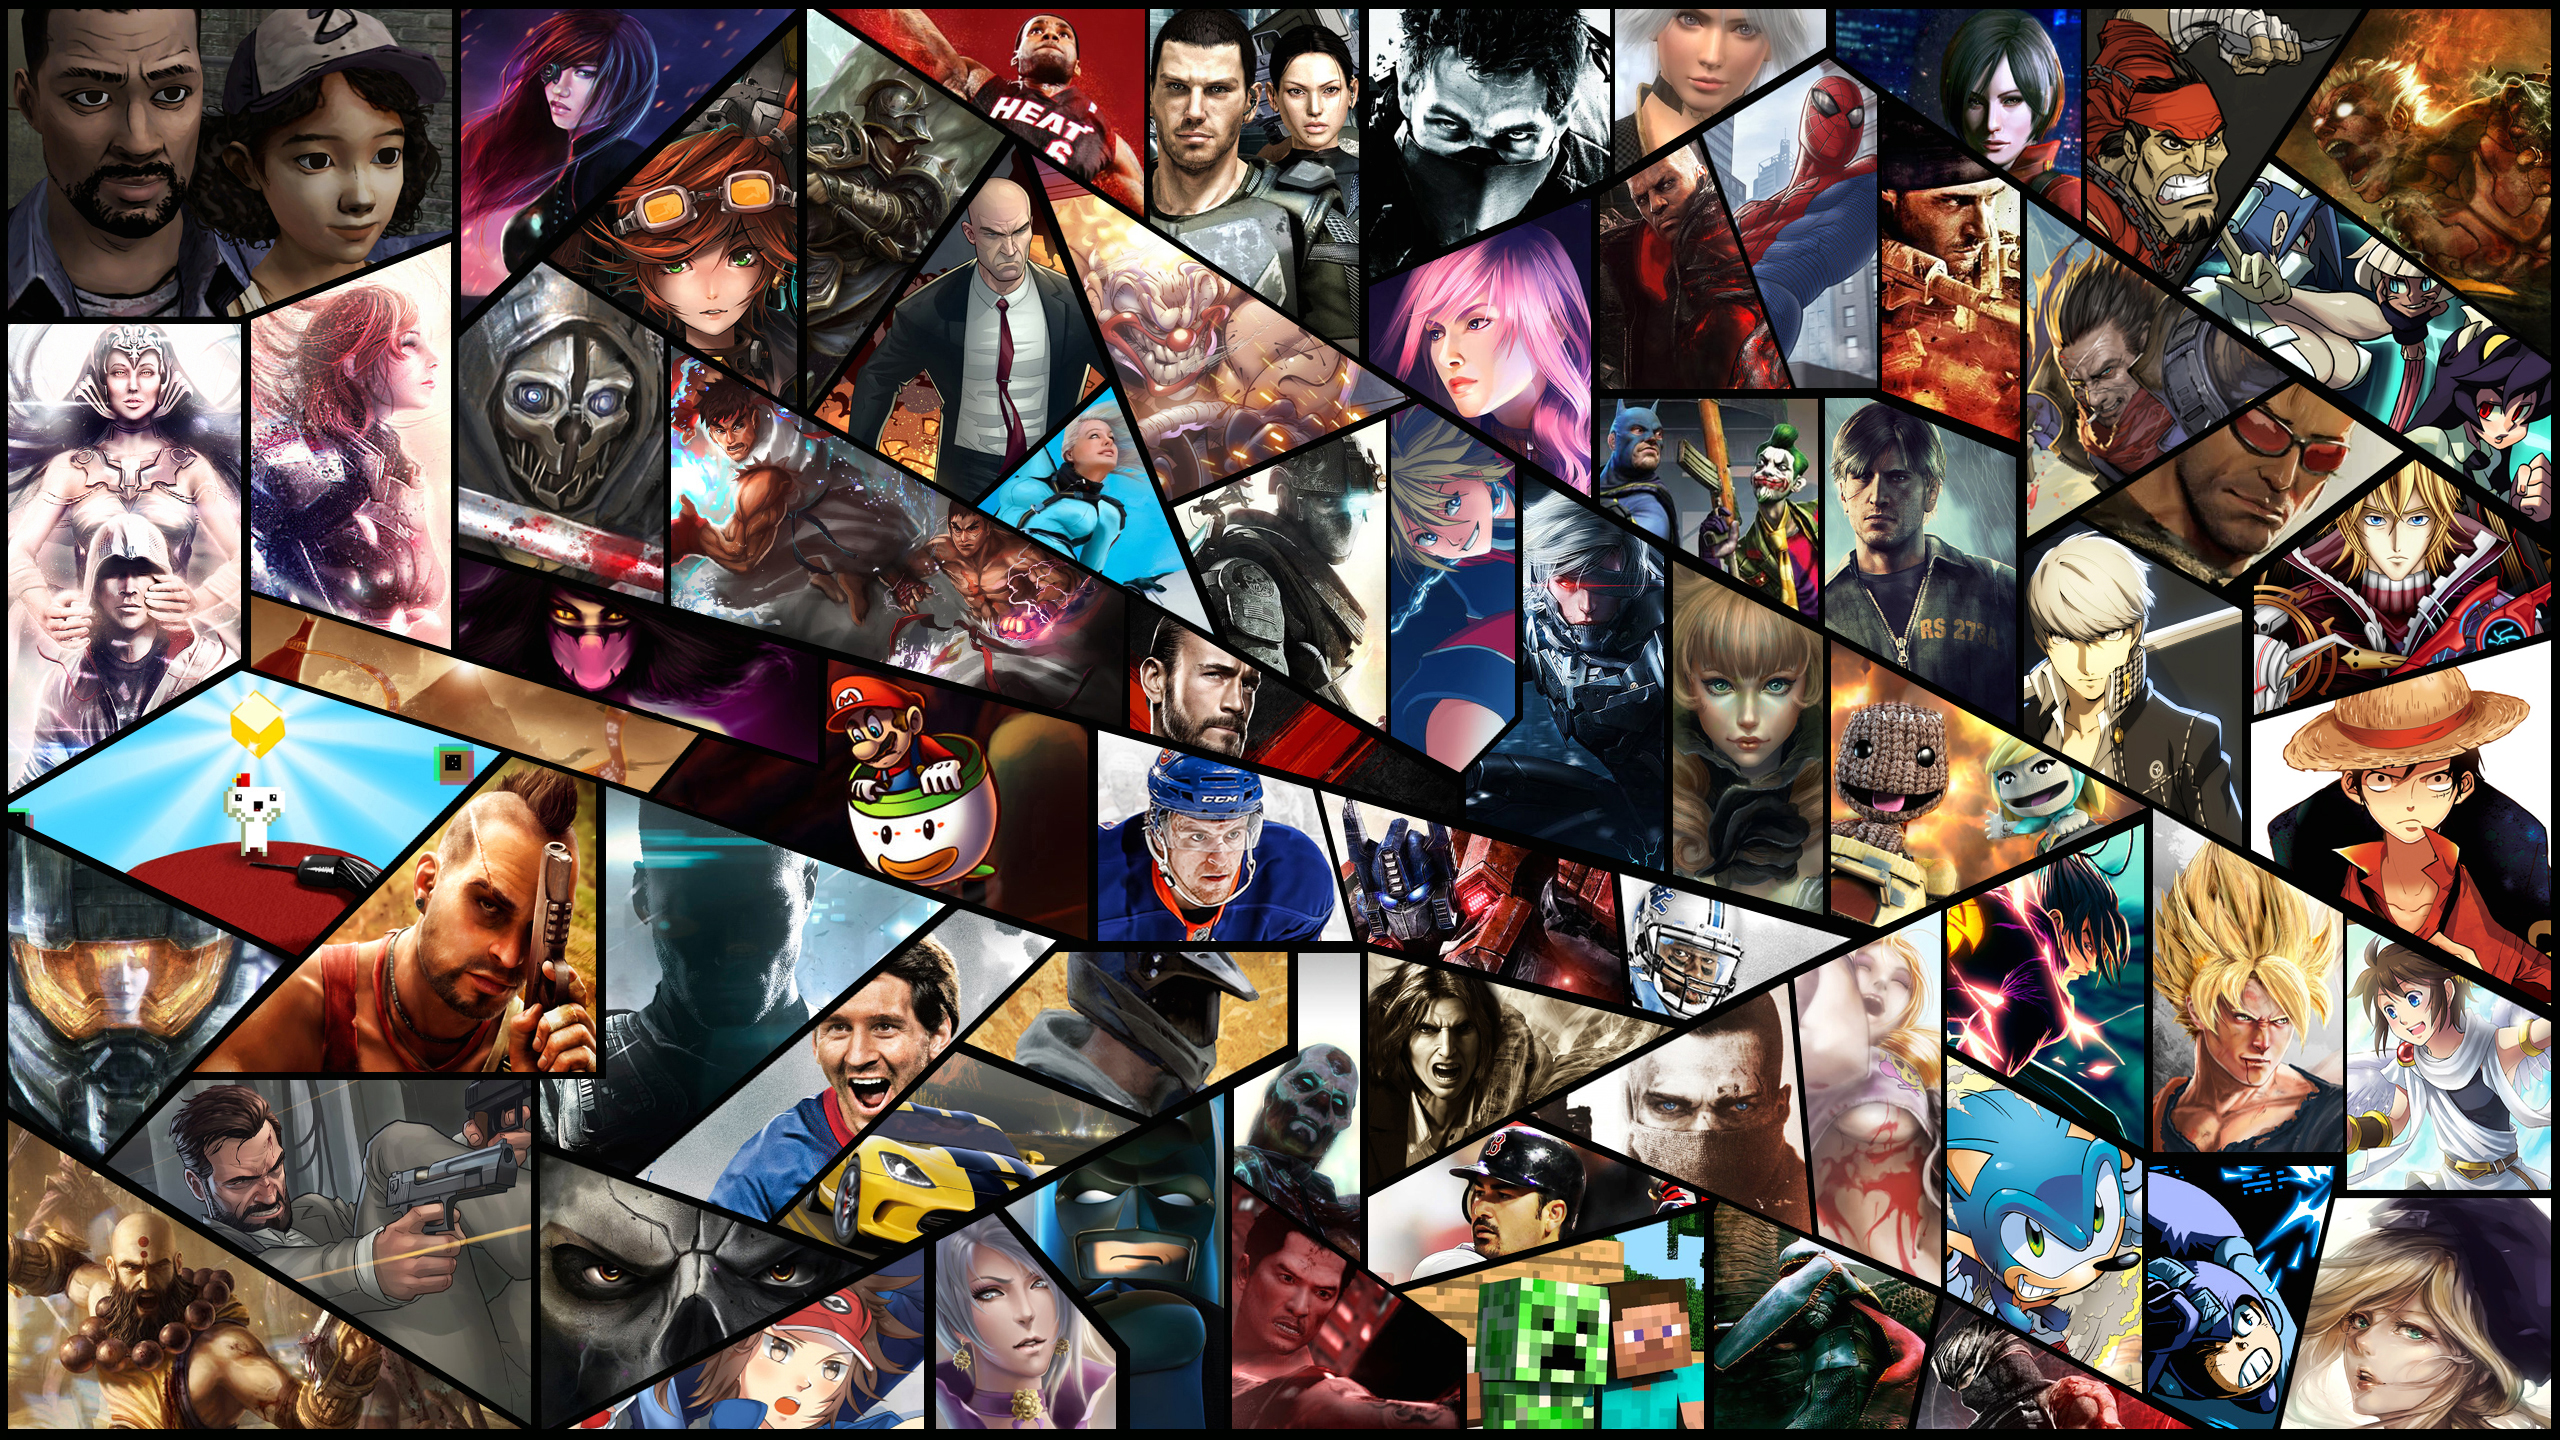  Collage  HD Wallpaper  Background Image 2560x1440 ID 